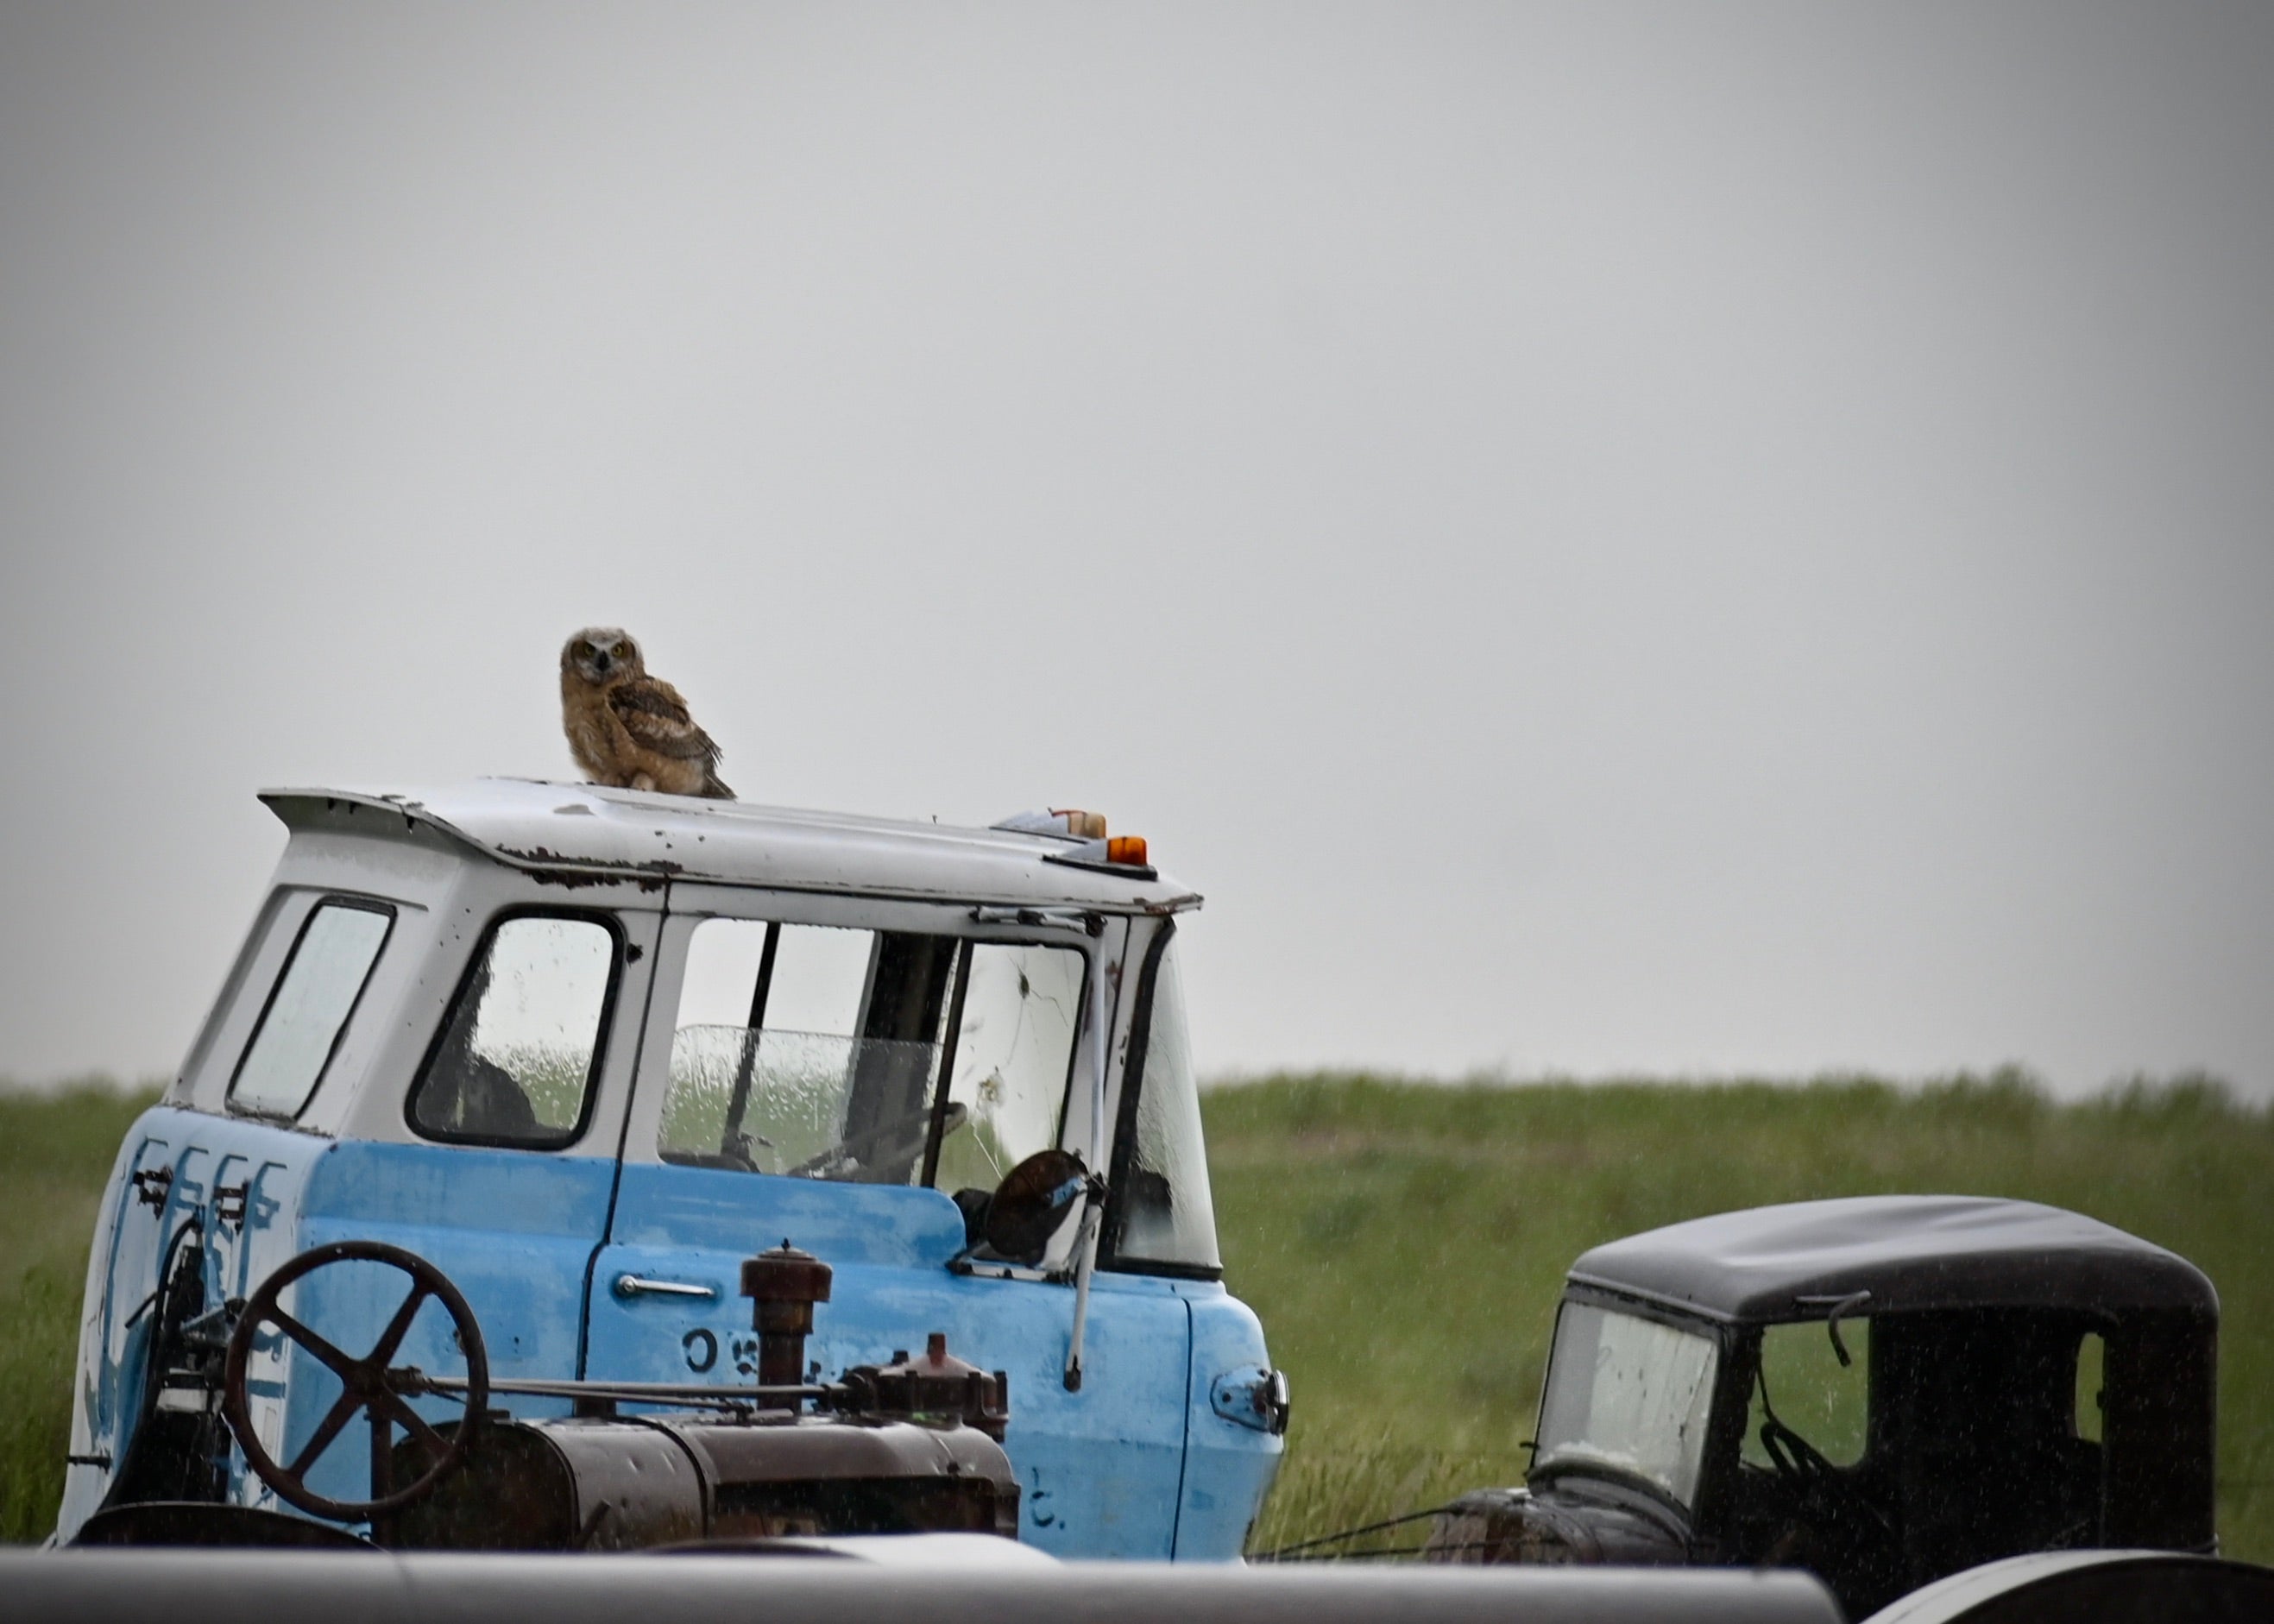 a young owl sits on top of what looks like an old vehicle cab from the '60's or 70's. Nearby is an old rusted piece of farm machinery and an old broken car that looks like it is from the 1920s